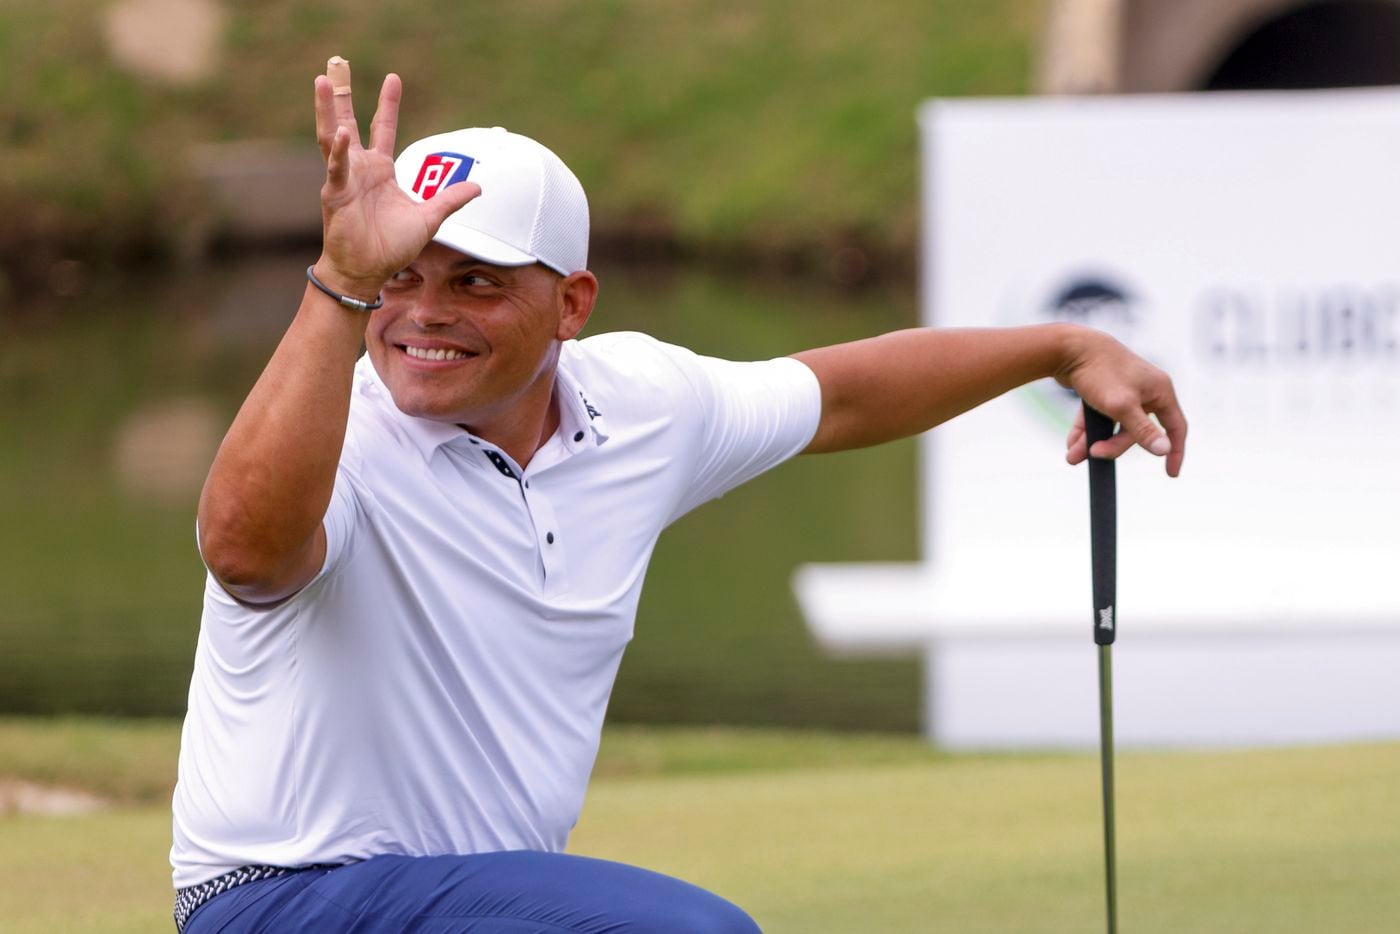 MLB Hall of Fame catcher Ivan "Pudge" Rodriguez waves to fans on the 17th green during the...